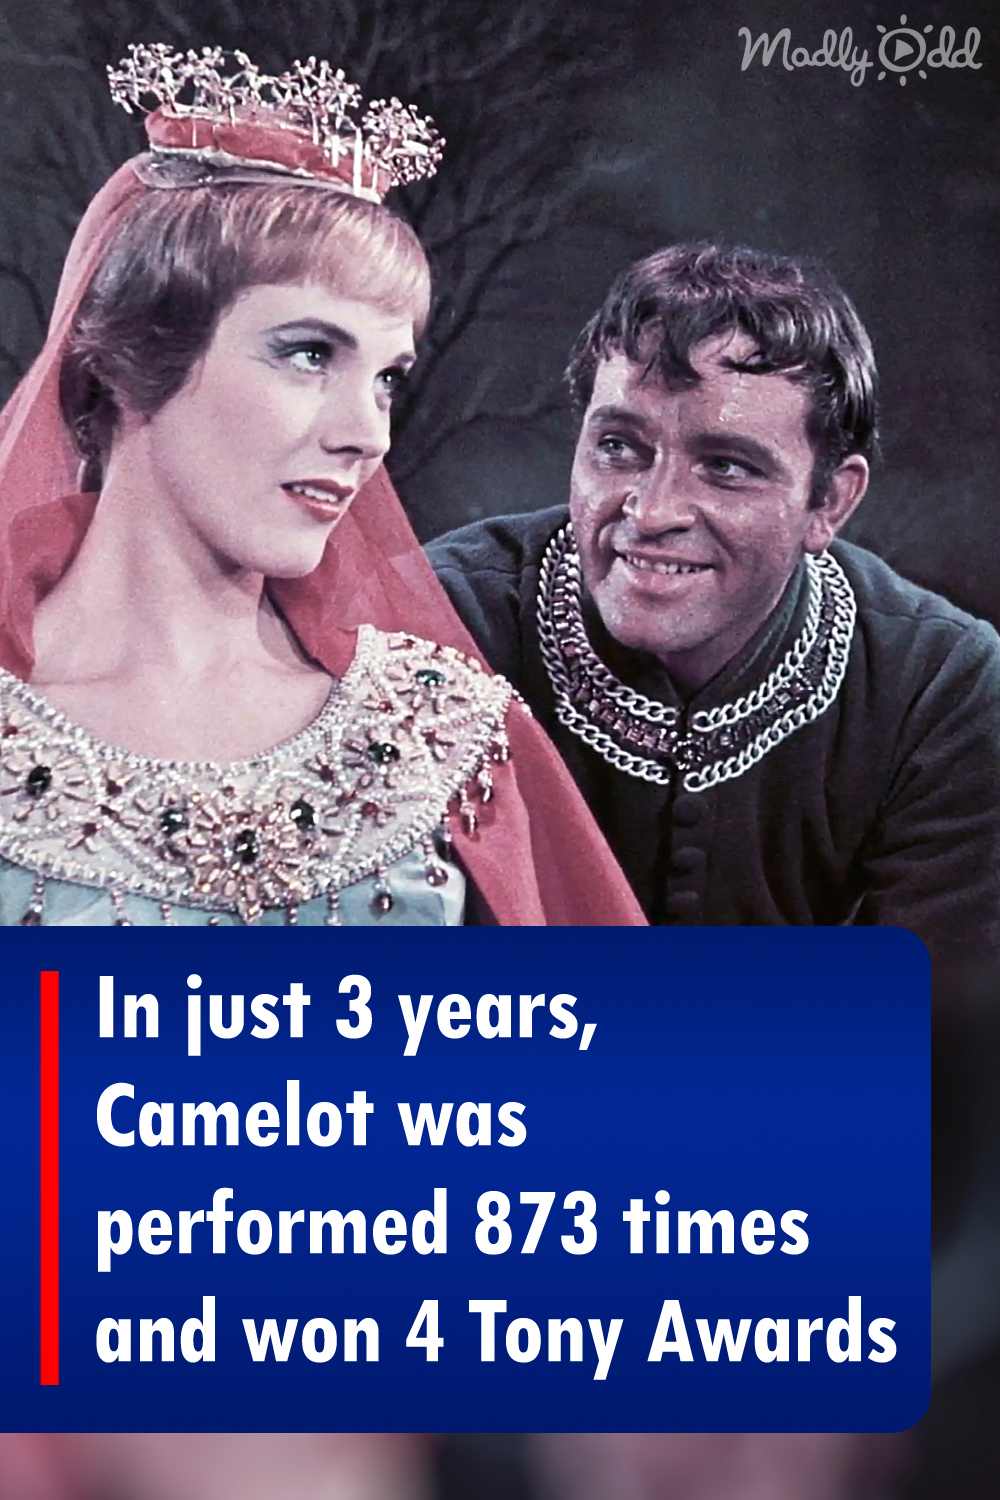 In just 3 years, Camelot was performed 873 times and won 4 Tony Awards